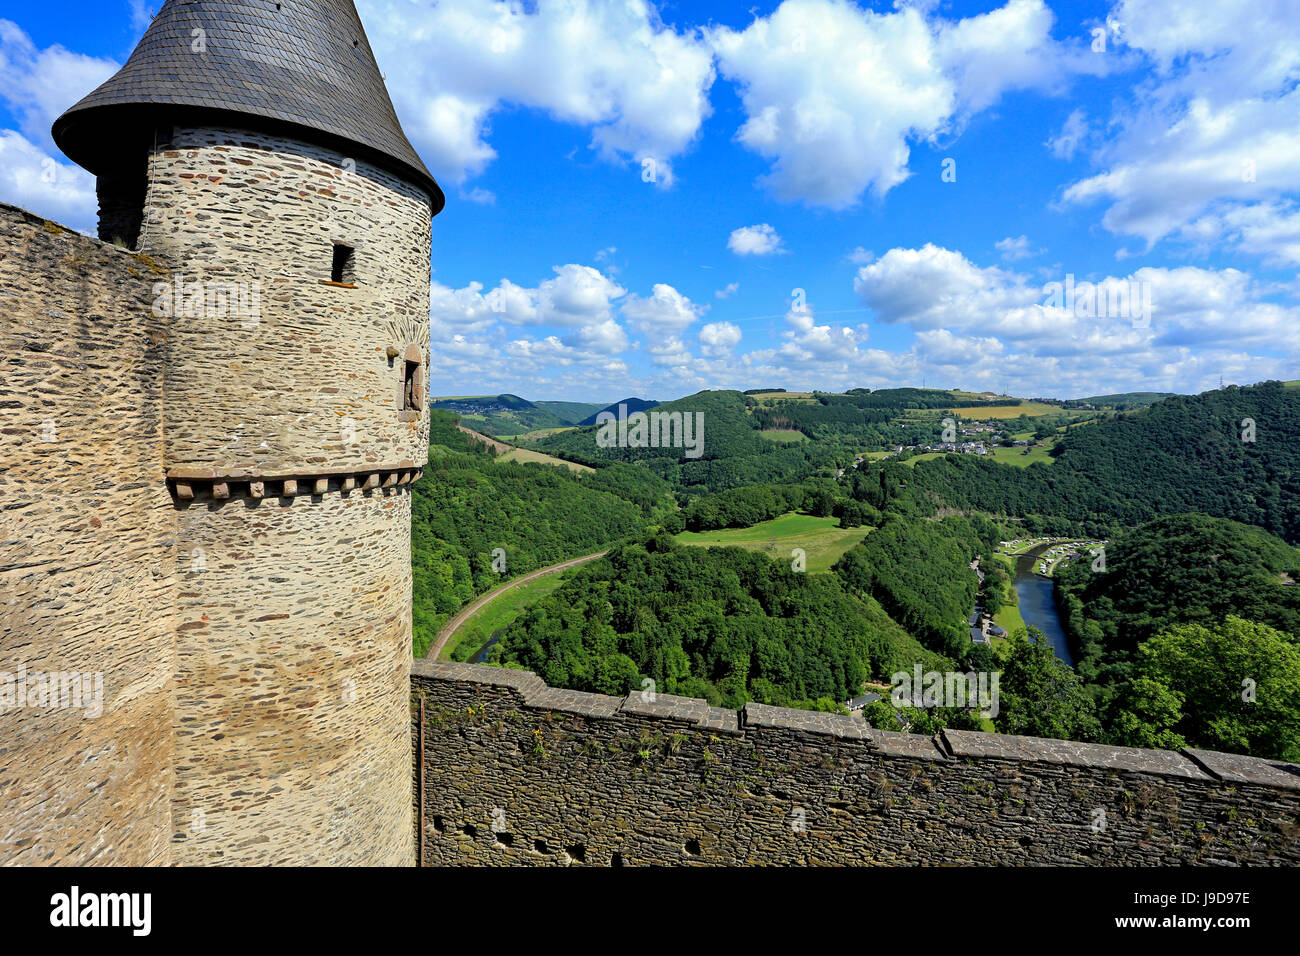 Bourscheid Castle in the Valley of Sauer River, Canton of Diekirch, Grand Duchy of Luxembourg, Europe Stock Photo